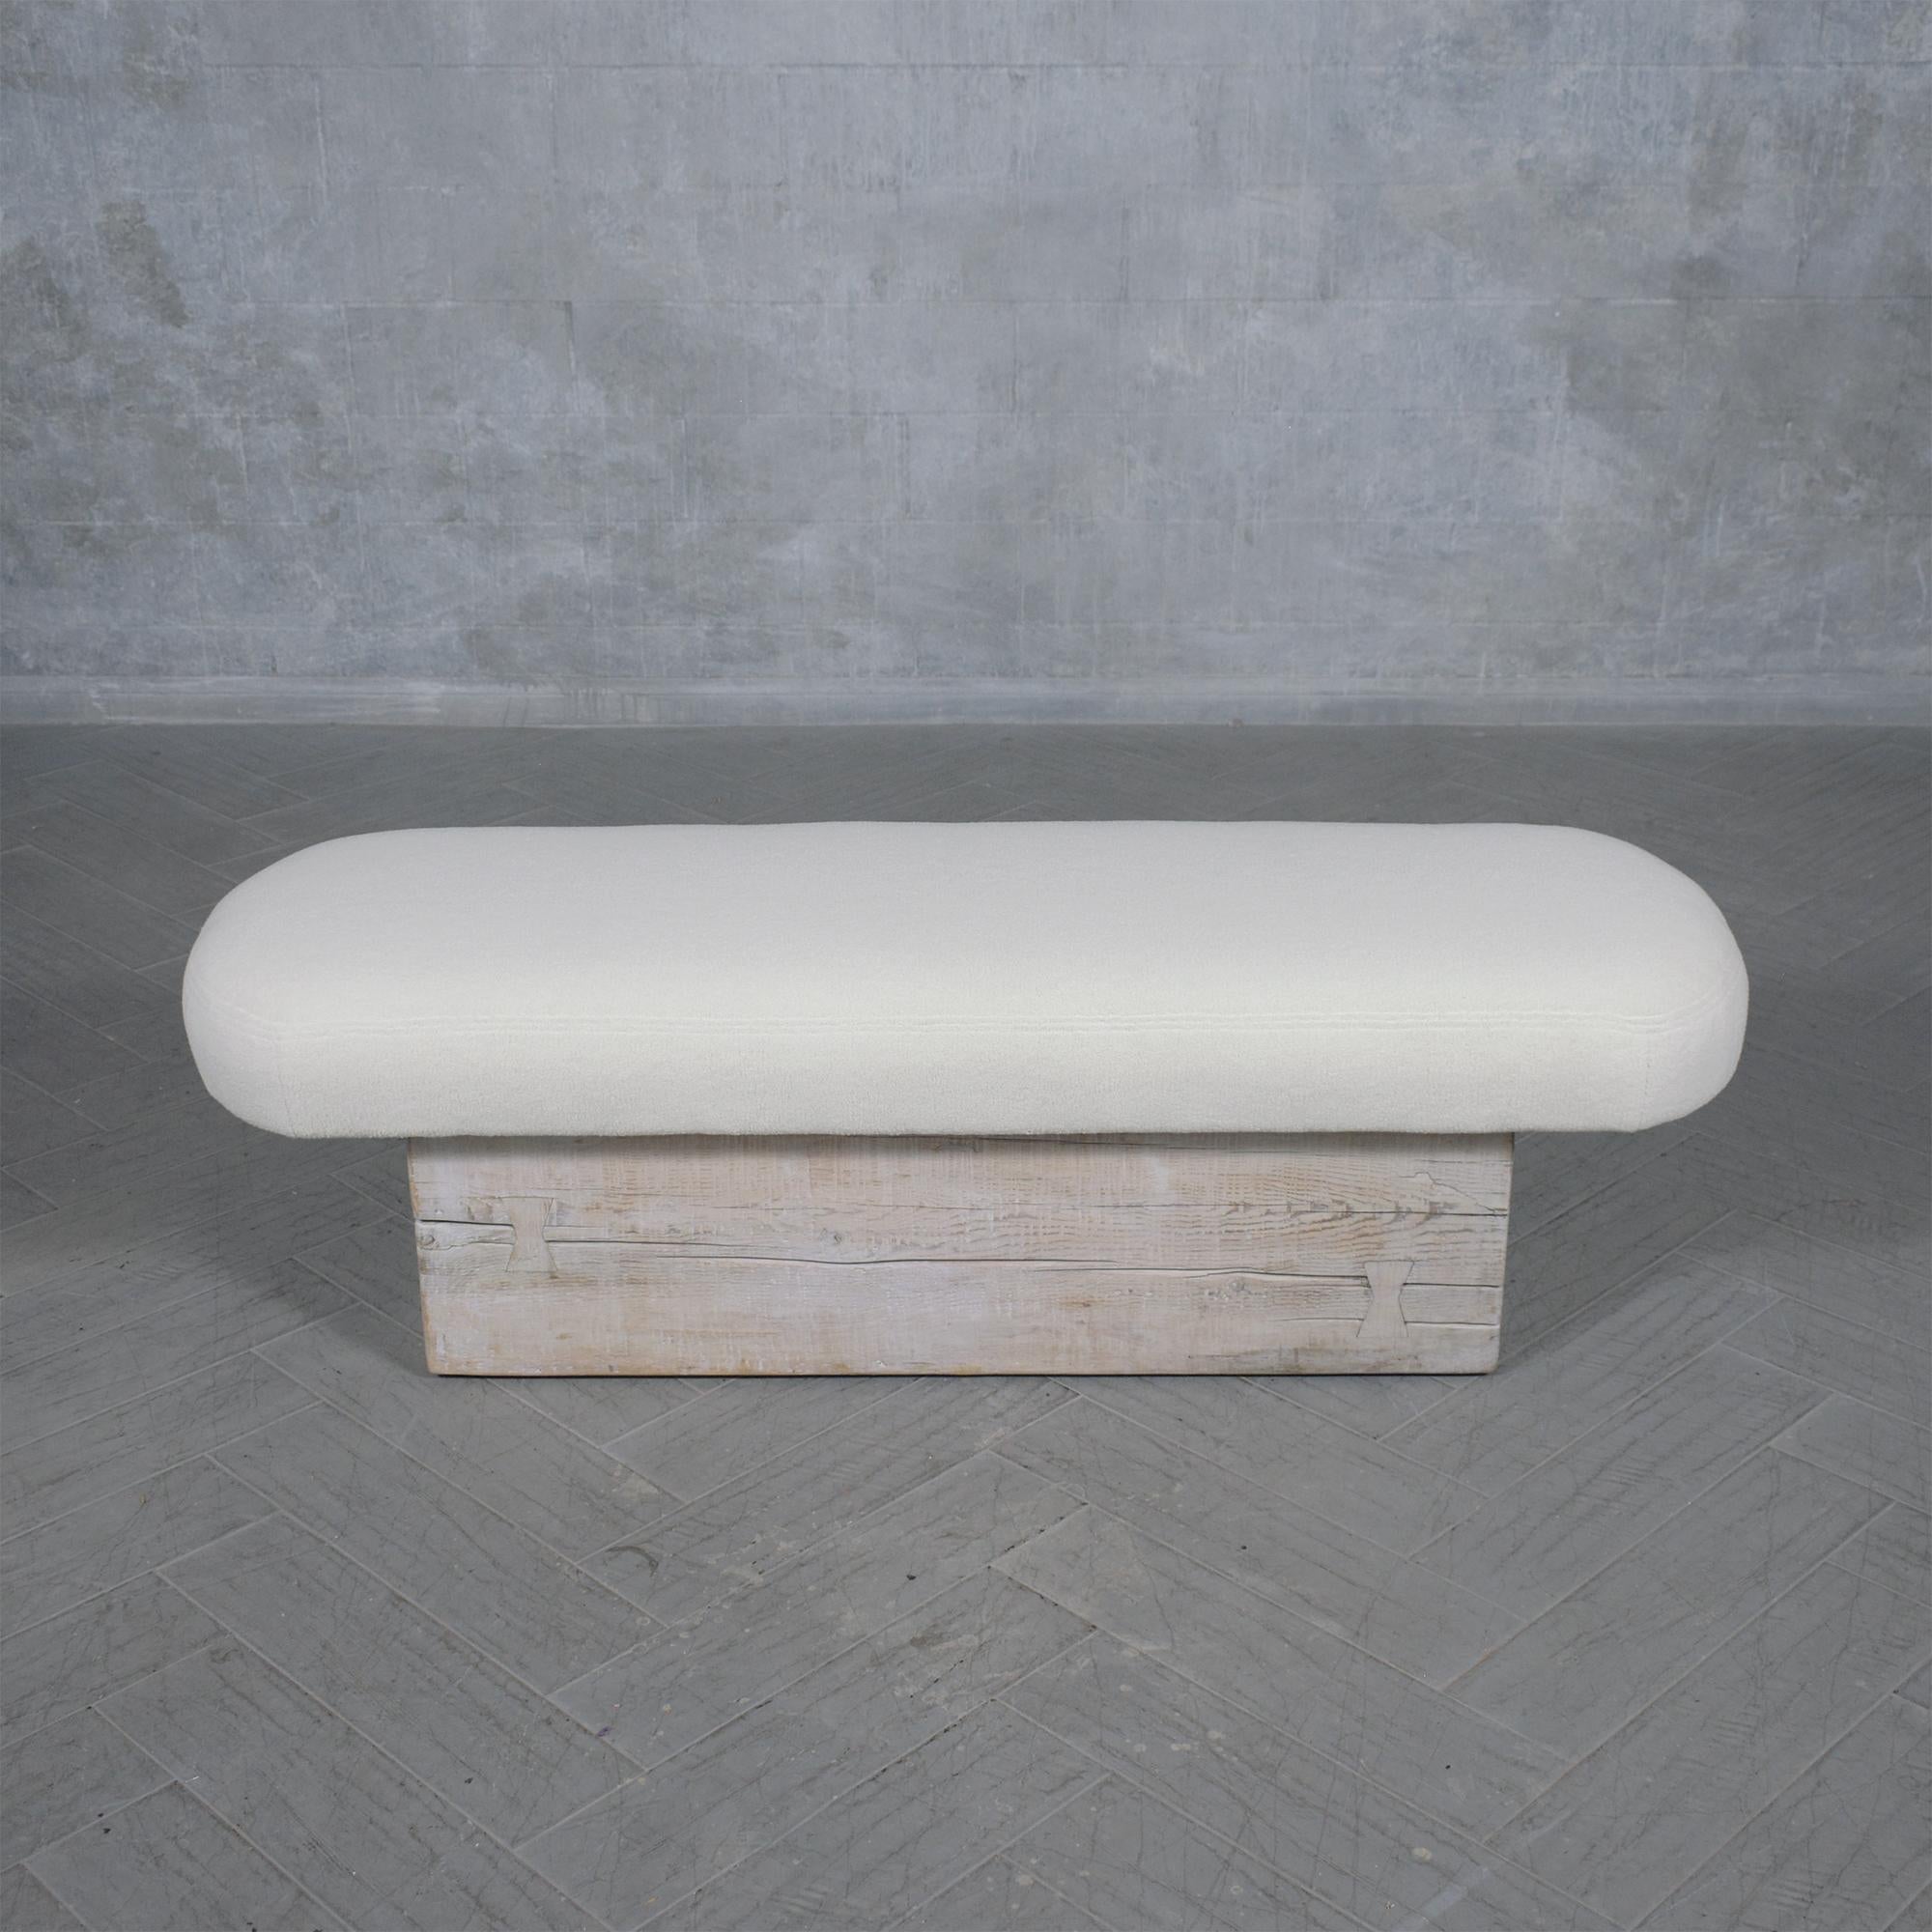 Experience the perfect marriage of modern design and timeless craftsmanship with our beautifully restored modern slab bench. This piece is meticulously crafted from solid wood, showcasing the skill and attention to detail that exemplifies true